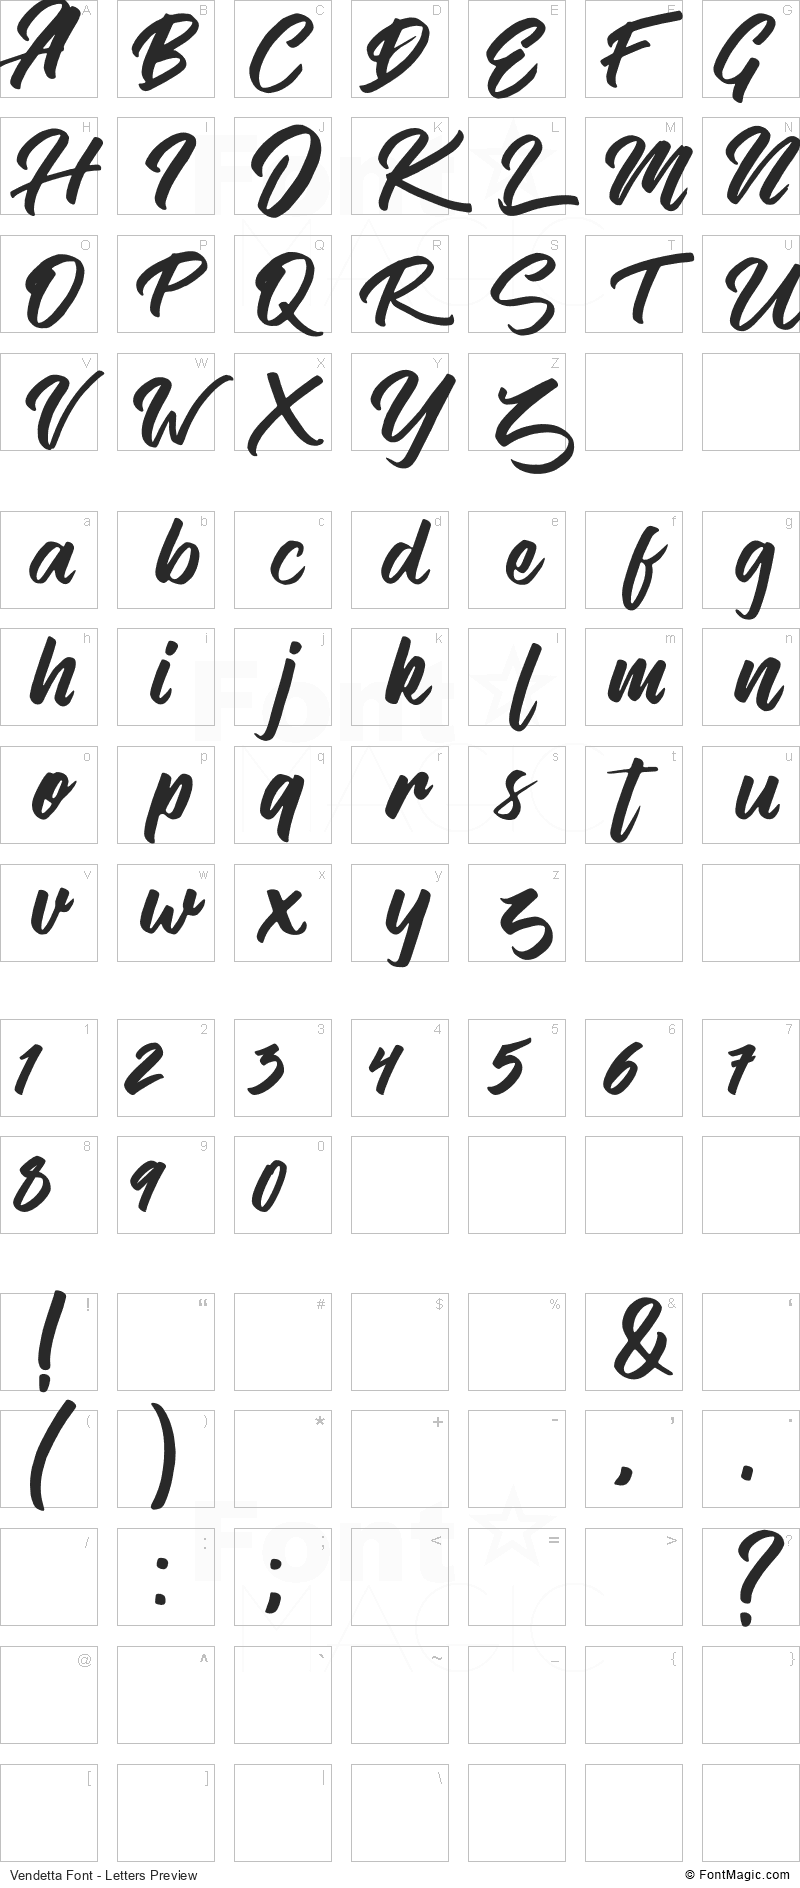 Vendetta Font - All Latters Preview Chart